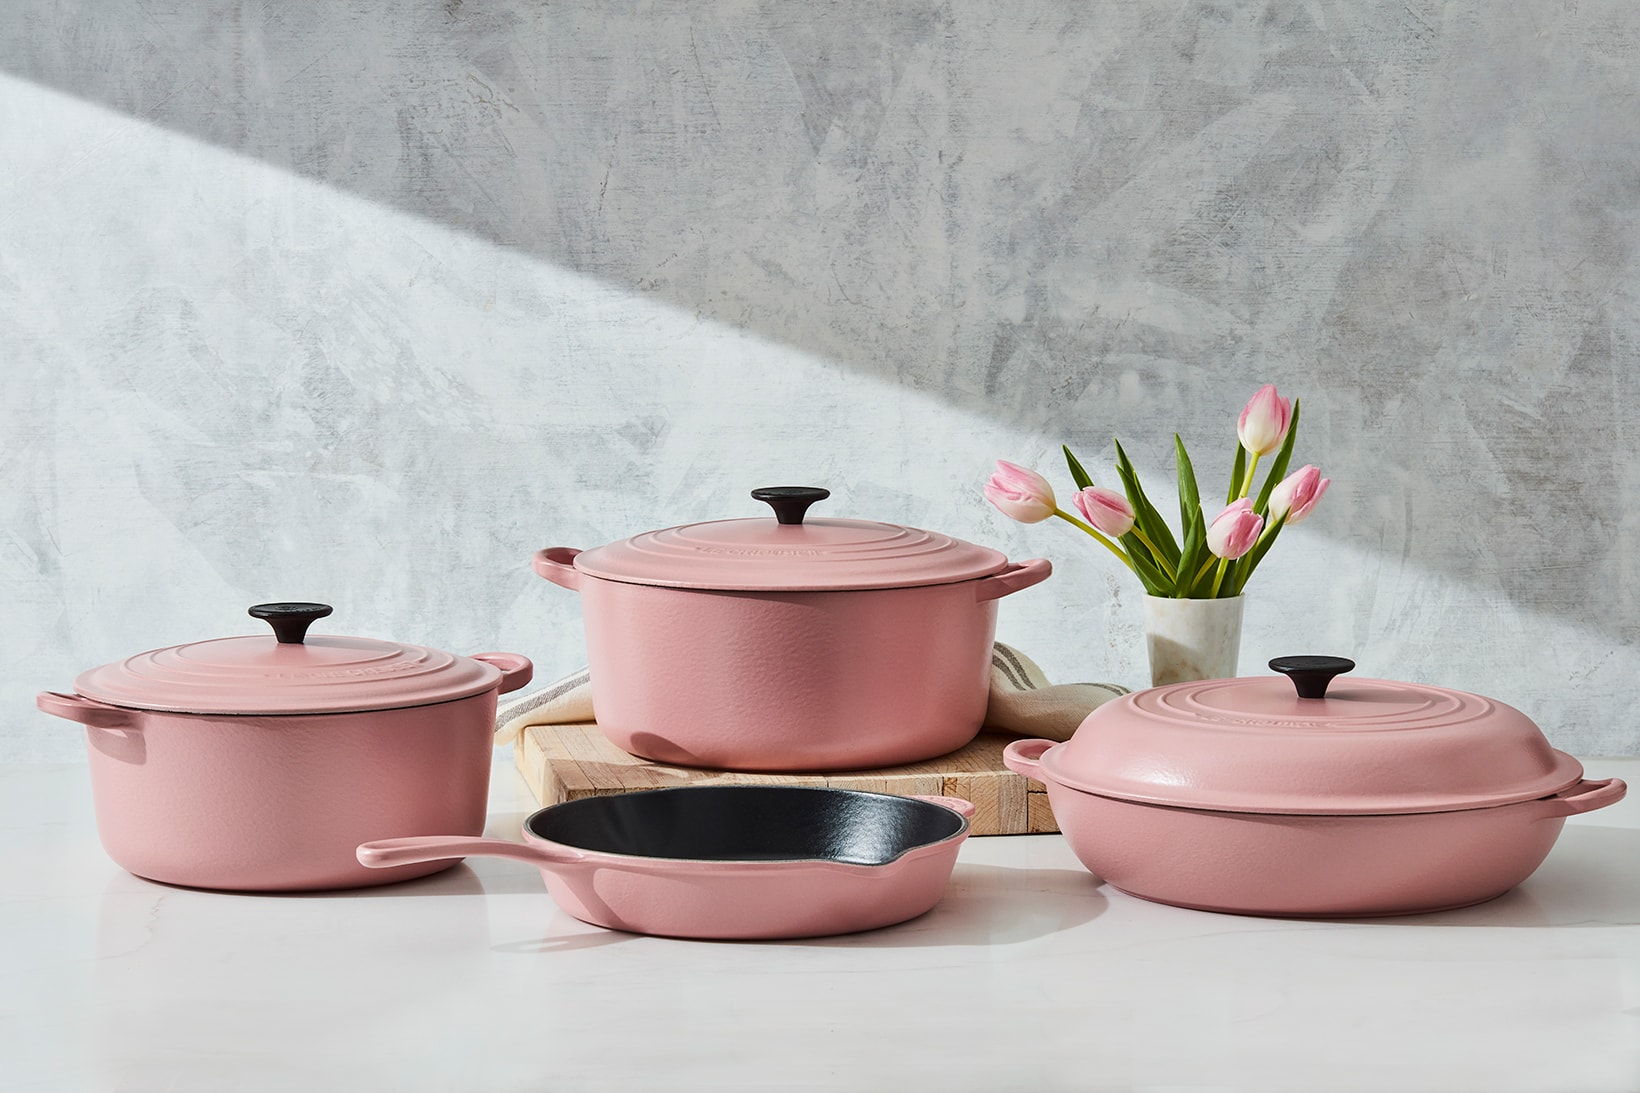 Le Creuset has just released a new colourway and it's perfect for spring